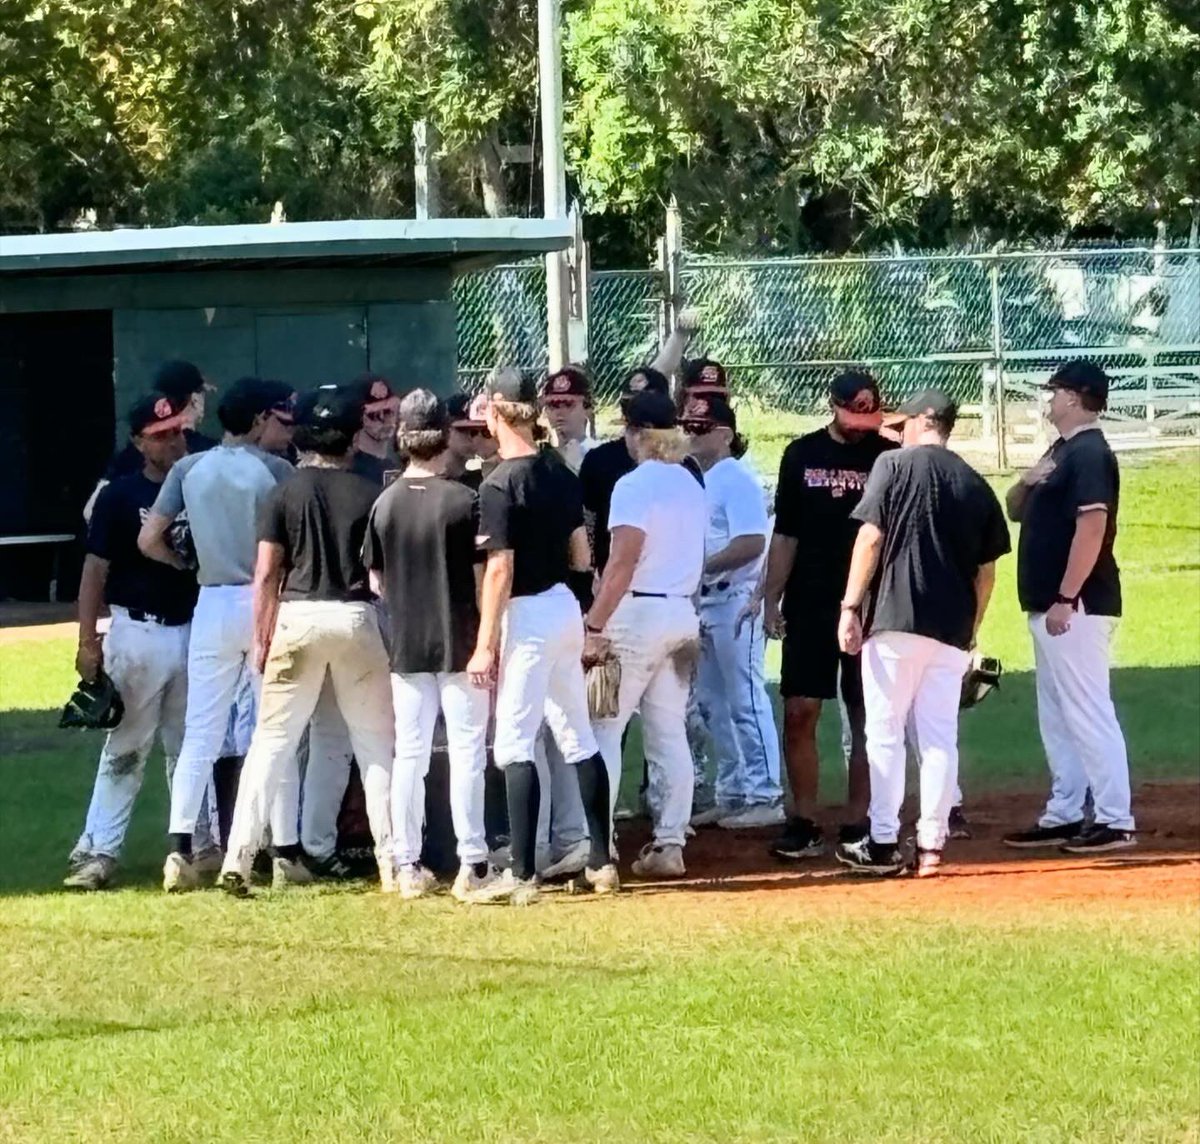 Boys wrapped up the SB 24 trip down in St. Pete! Thanks to all the families who traveled, parents who helped organize, and Coaches Greenman, Trevino, Meier, and KMac for making it a great week. Safe travels to everyone headed back to the Mitten! Home opener Wednesday 4:15pm